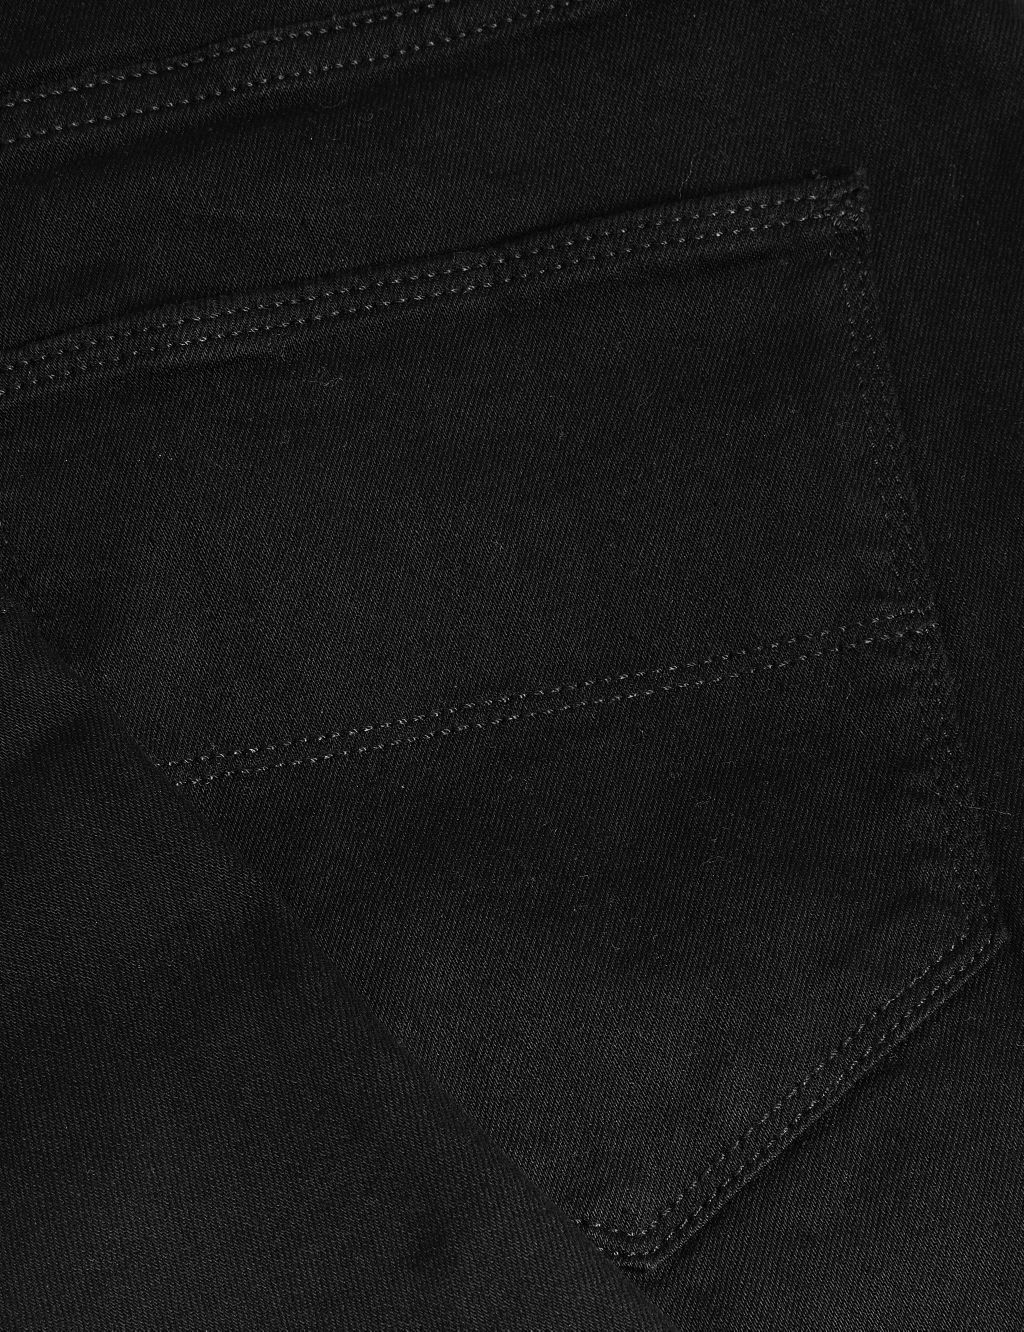 Straight Fit Stretch Jeans image 7